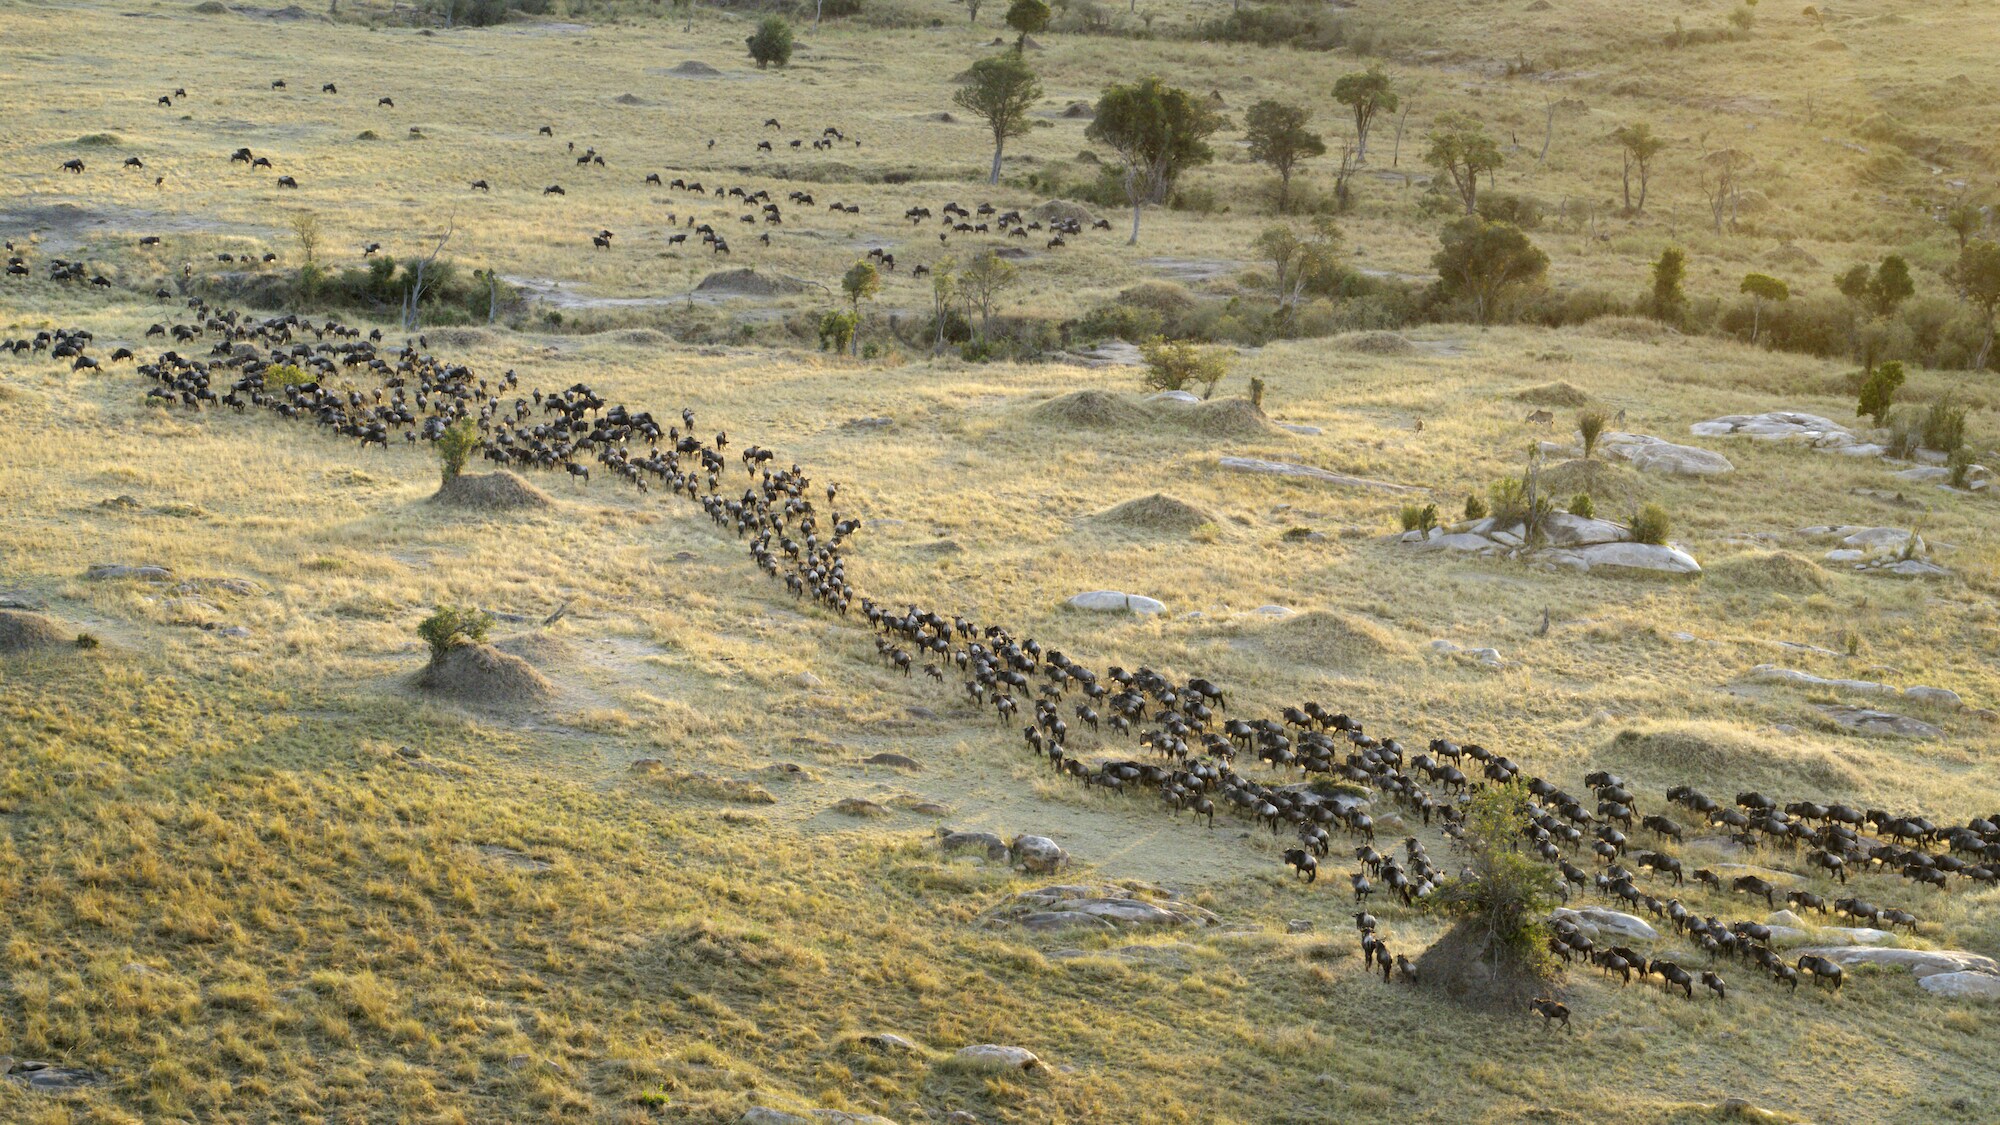 Migrating Wildebeest in the Serengeti National Park, Tanzania.  (National Geographic for Disney+)